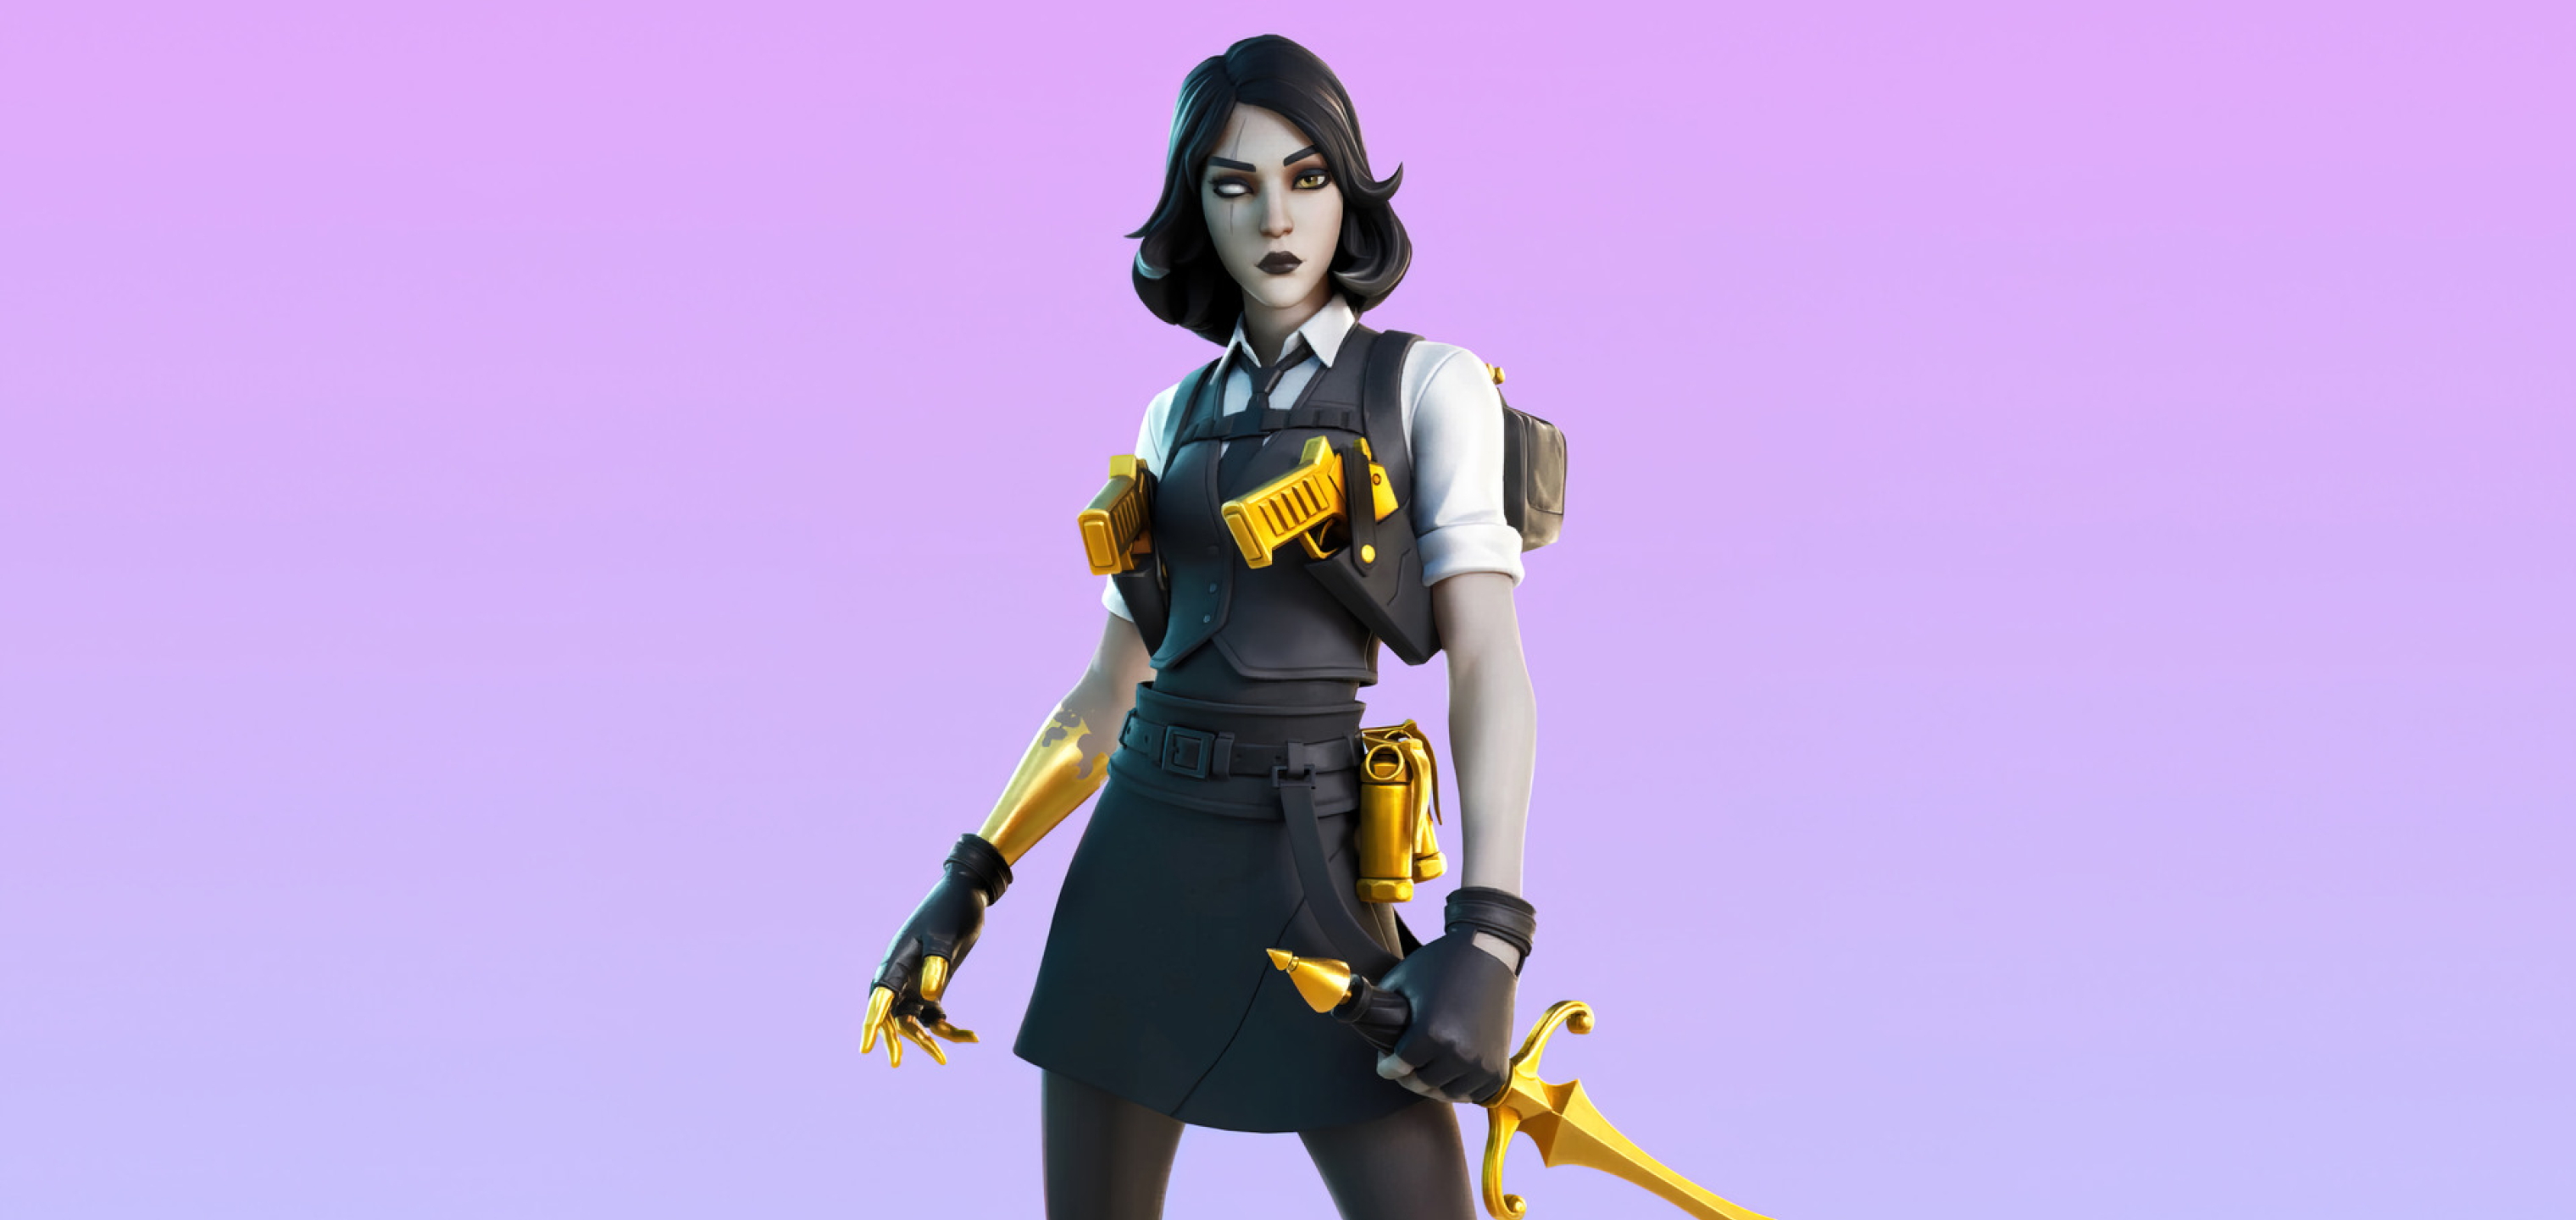 3040x1440 Resolution Fortnite Marigold Outfit Skin 3040x1440 Resolution ...